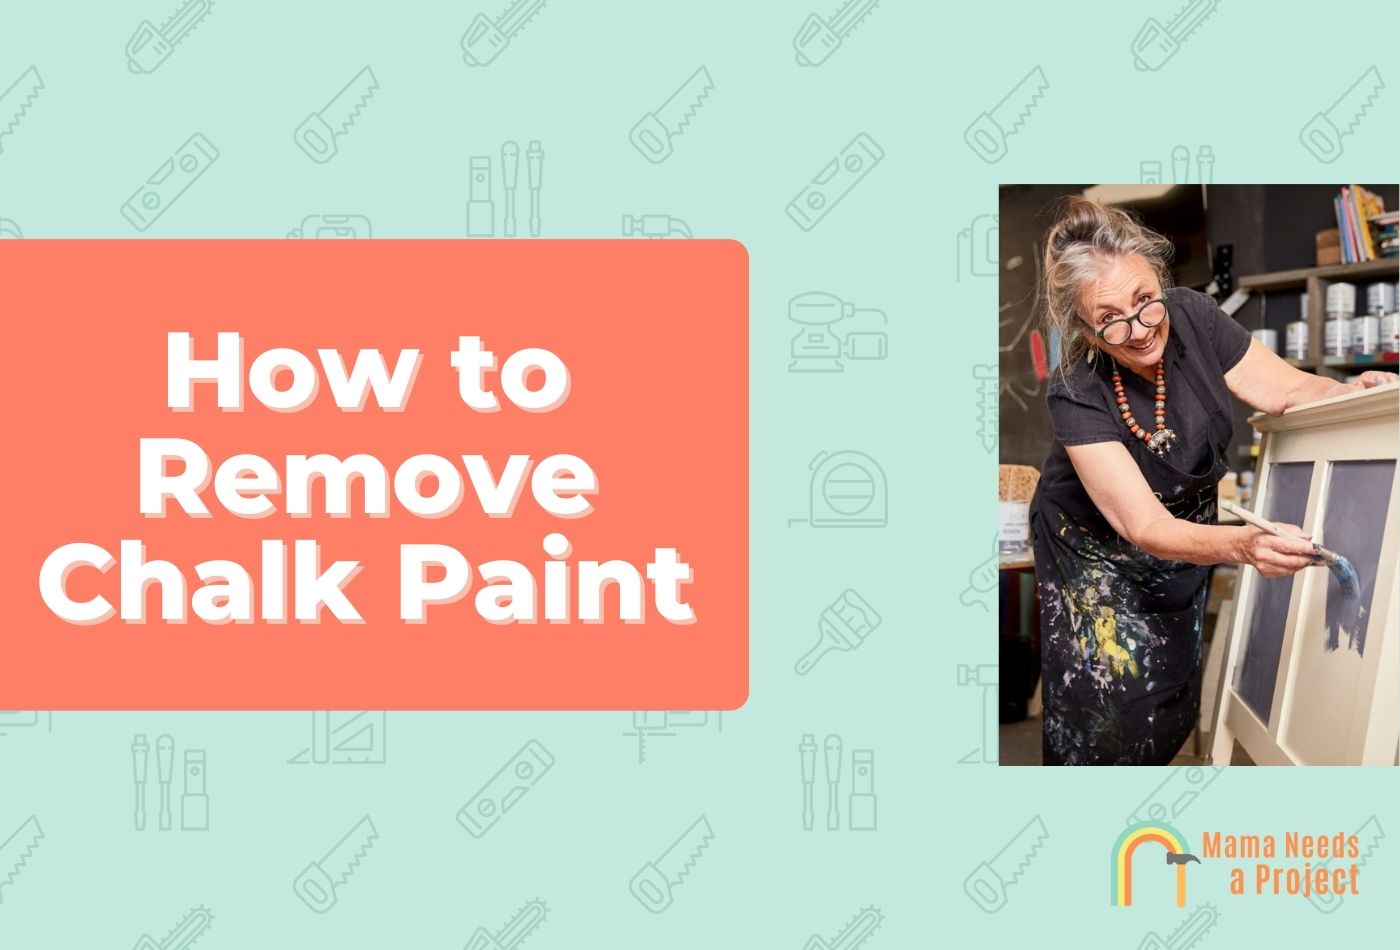 How to Remove Chalk Paint